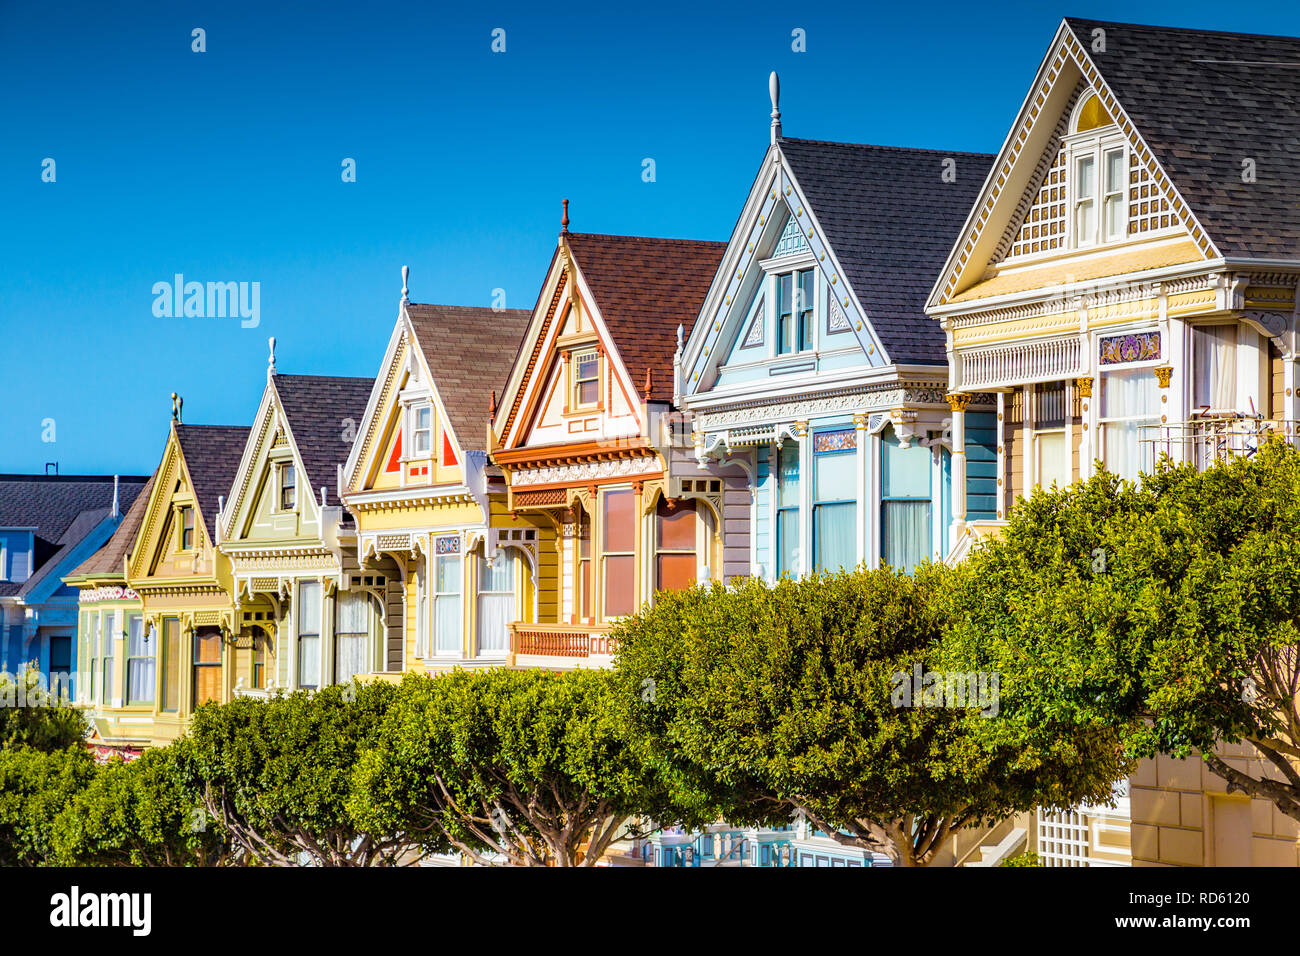 Famous Painted Ladies, a row of colorful Victorian houses located near scenic Alamo Square, on a beautiful sunny day, San Francisco, USA Stock Photo